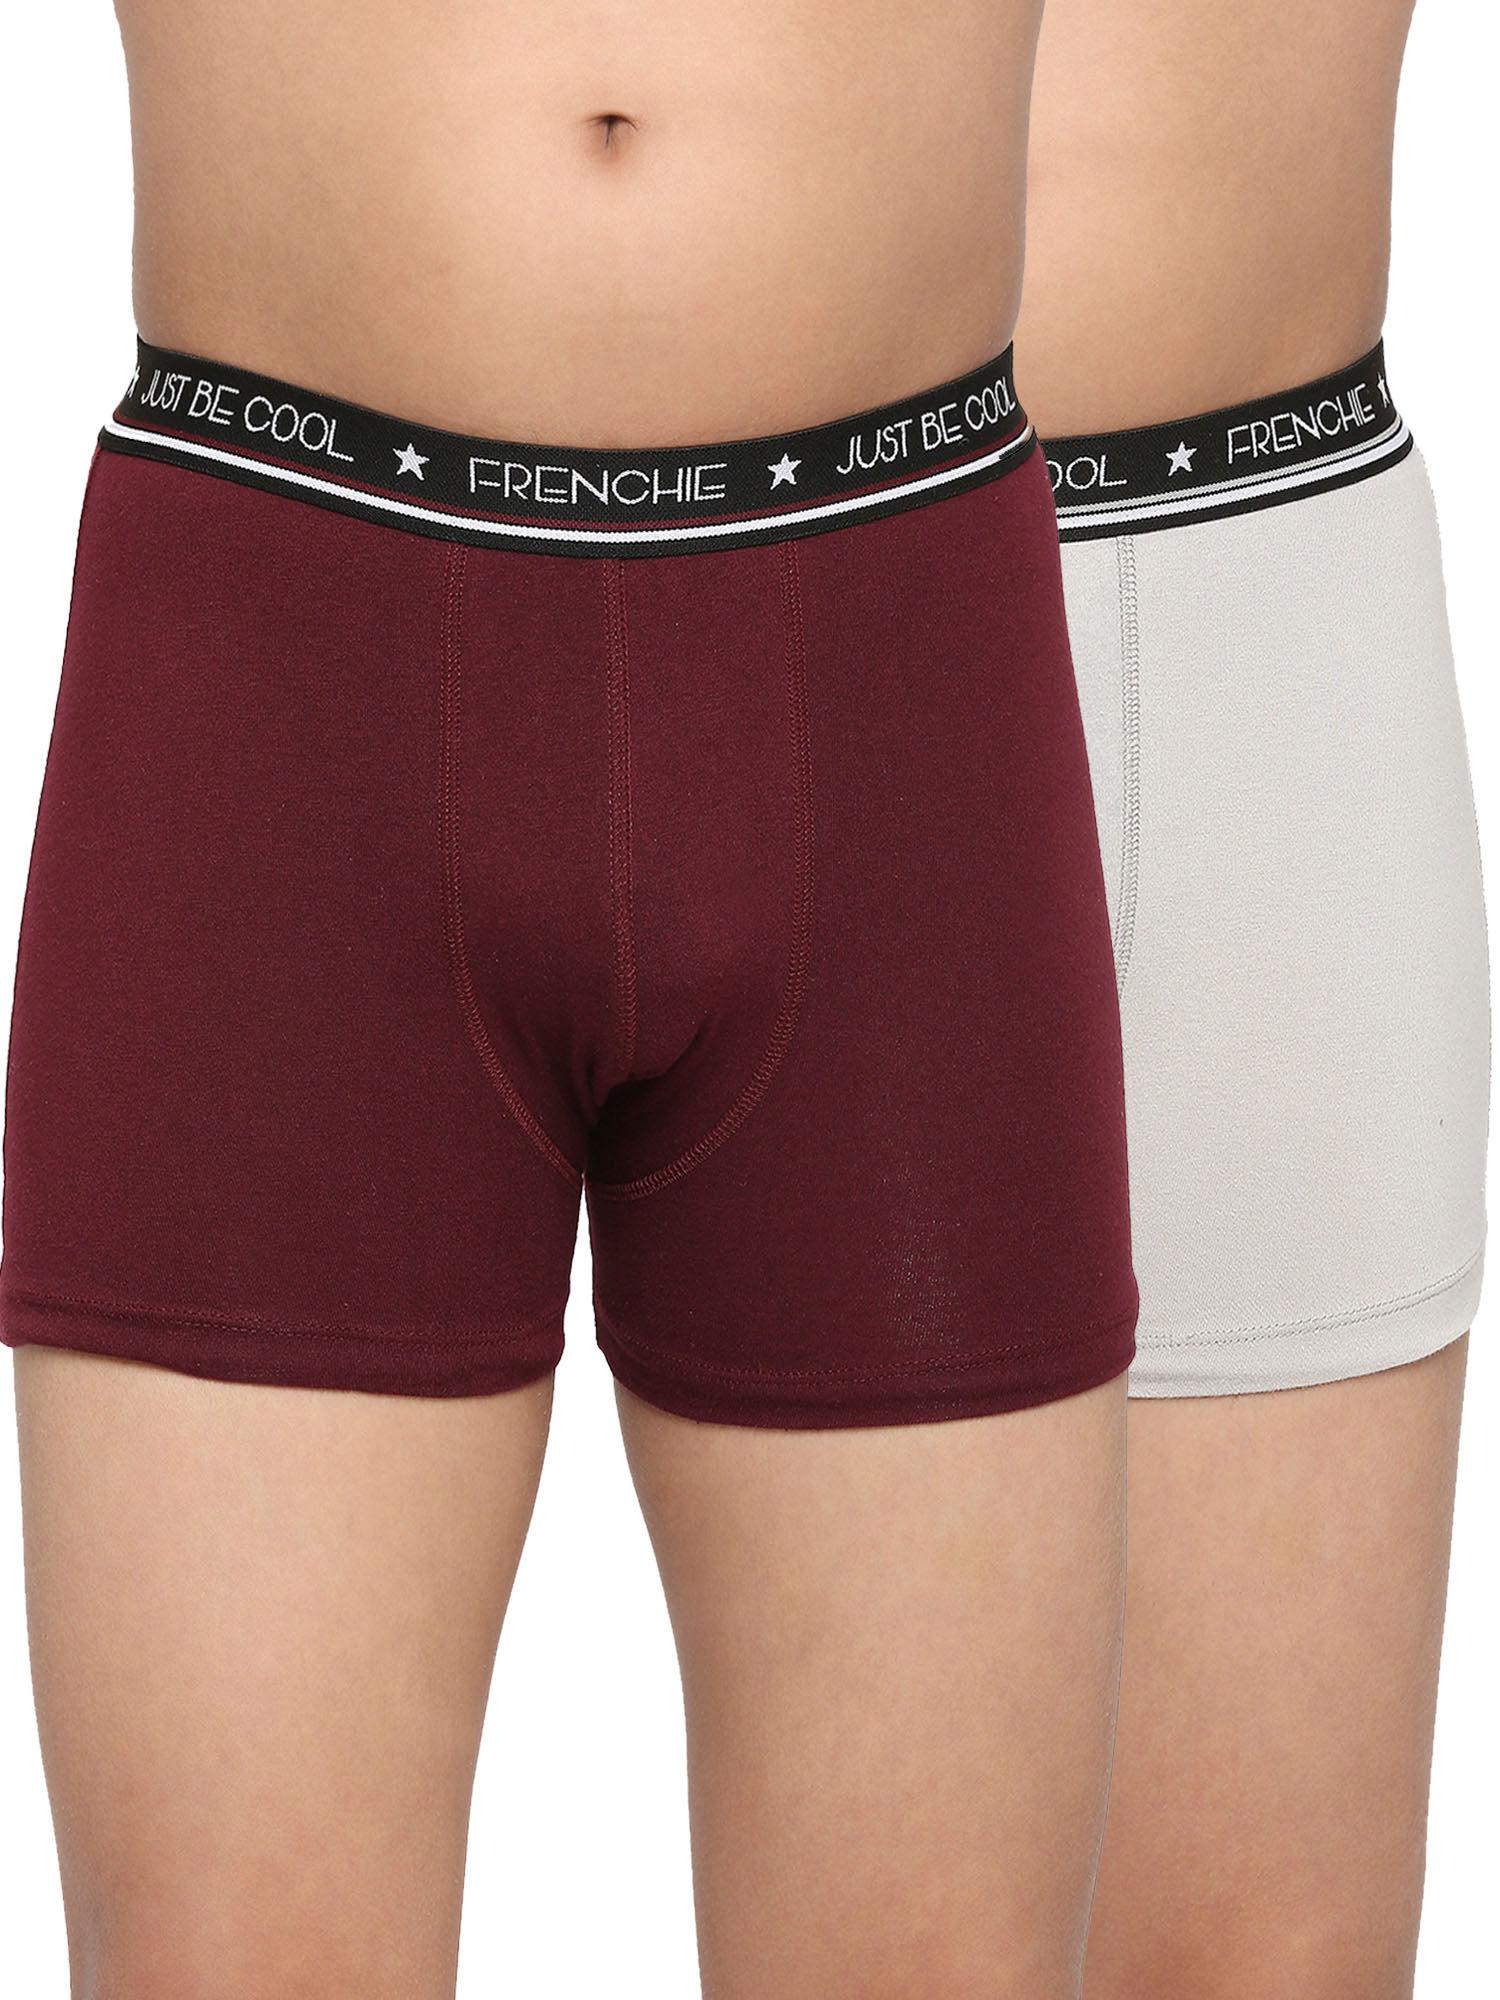 teenagers-cotton-trunk-wine-and-light-grey-(pack-of-2)